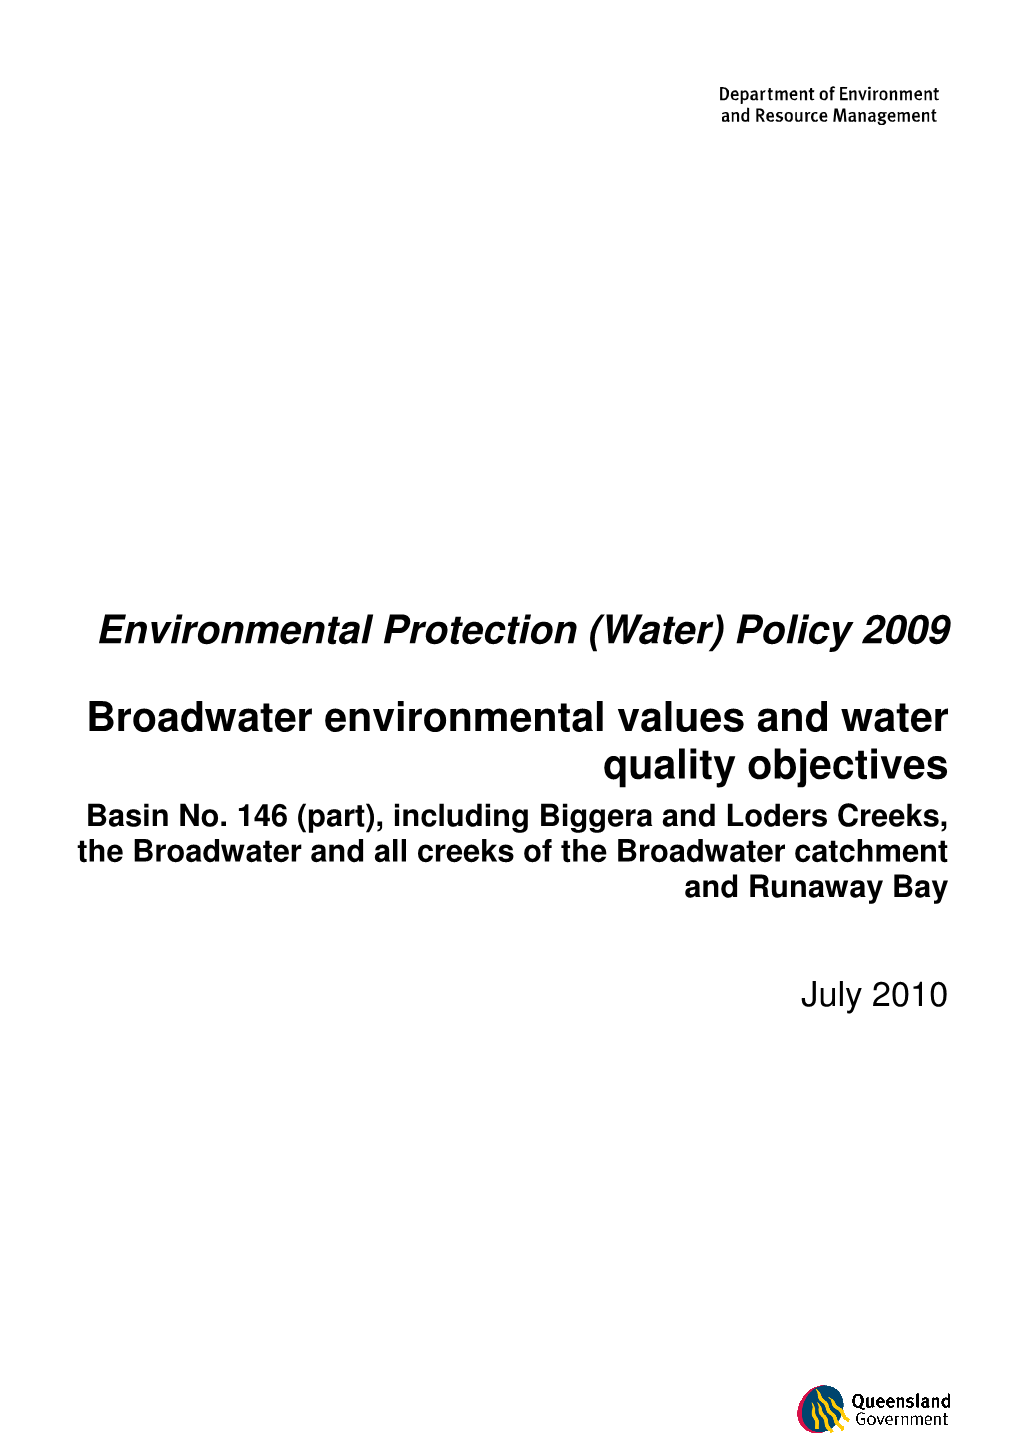 Broadwater Environmental Values and Water Quality Objectives Basin No